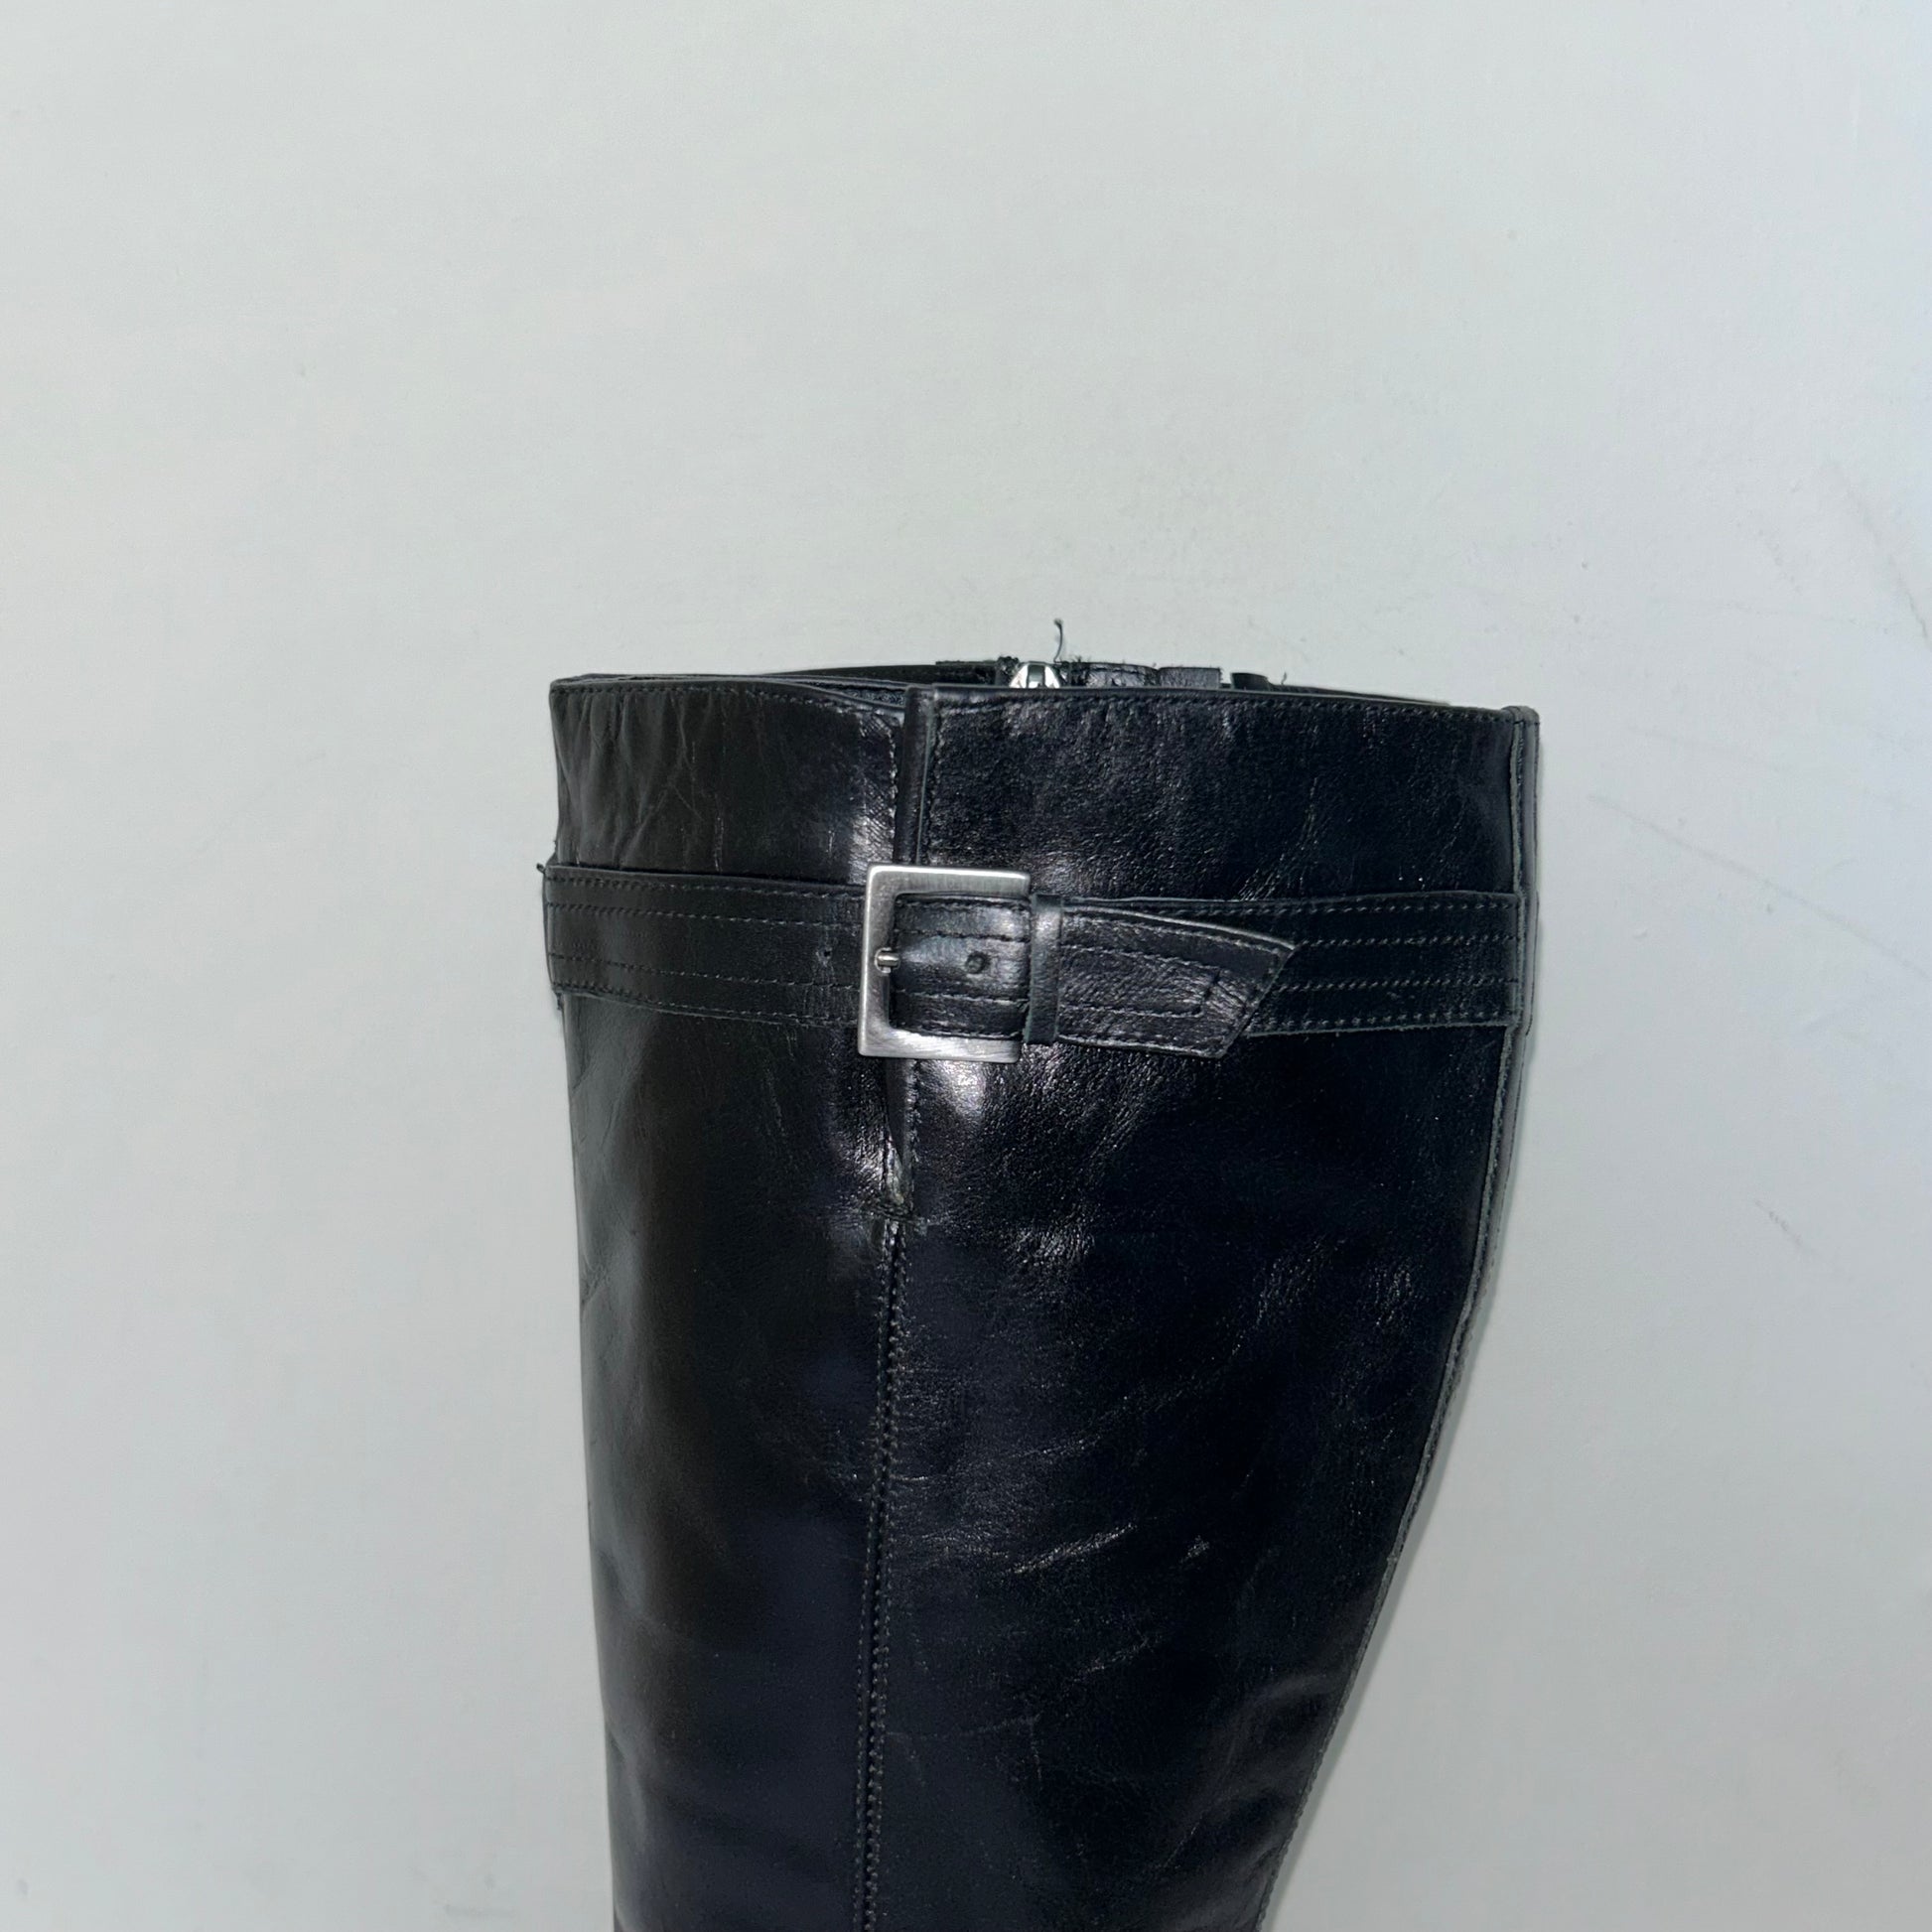 close up of black knee high block heel leather boots shown on a white background